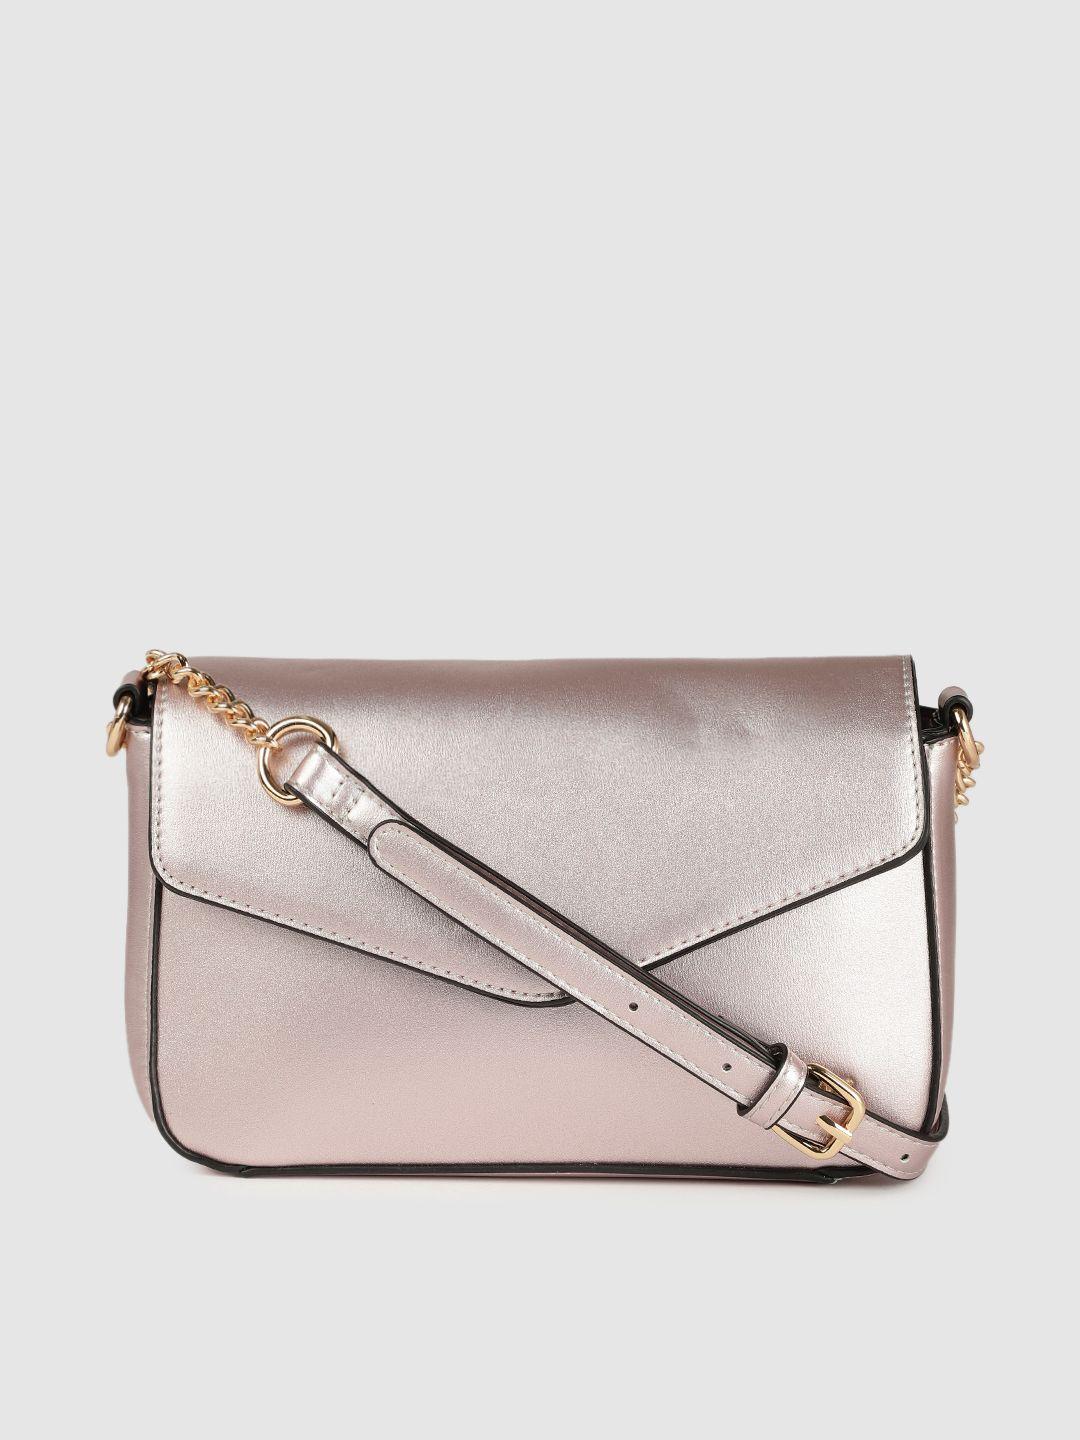 allen solly women champagne structured sling bag